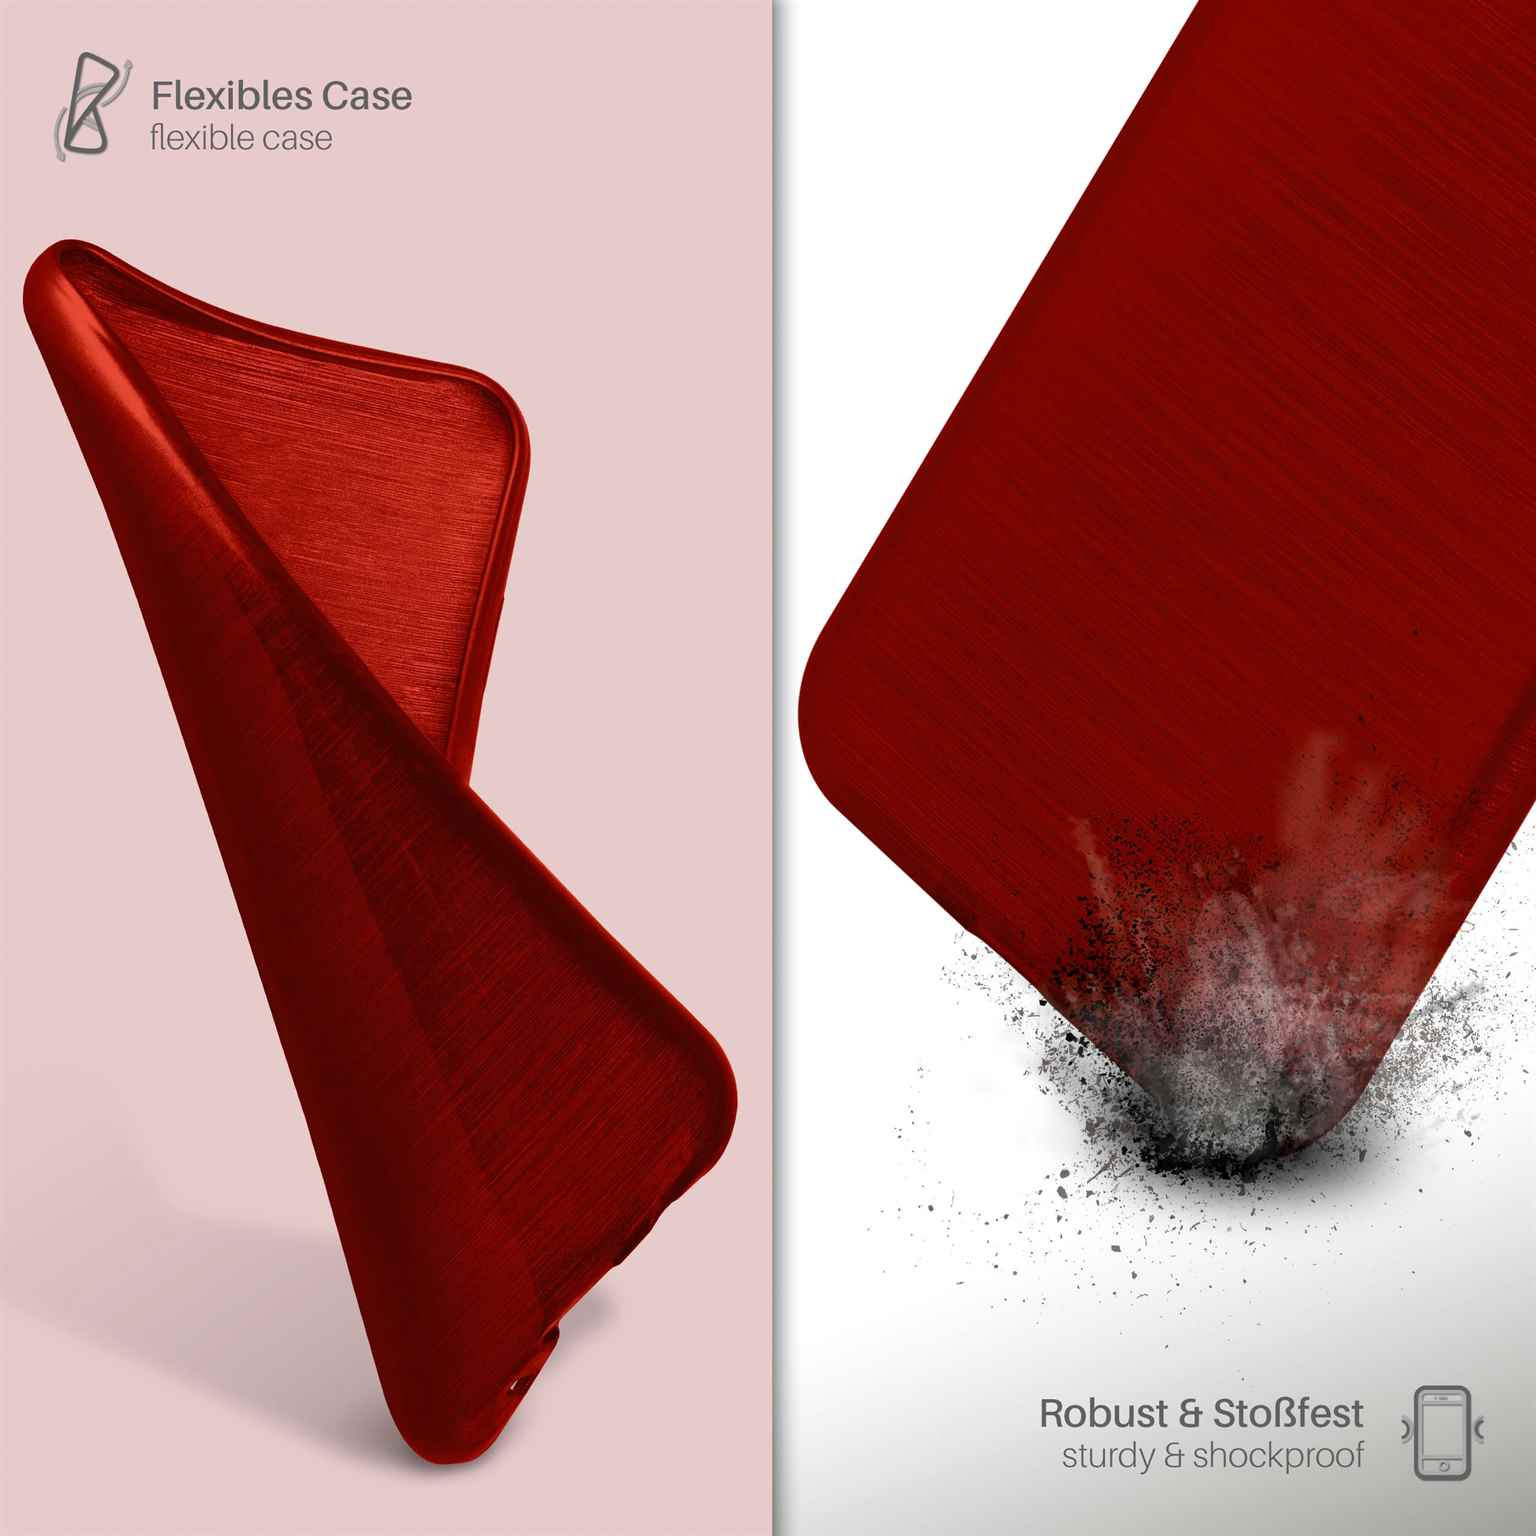 MOEX Brushed Case, Backcover, Apple, Crimson-Red 7, iPhone